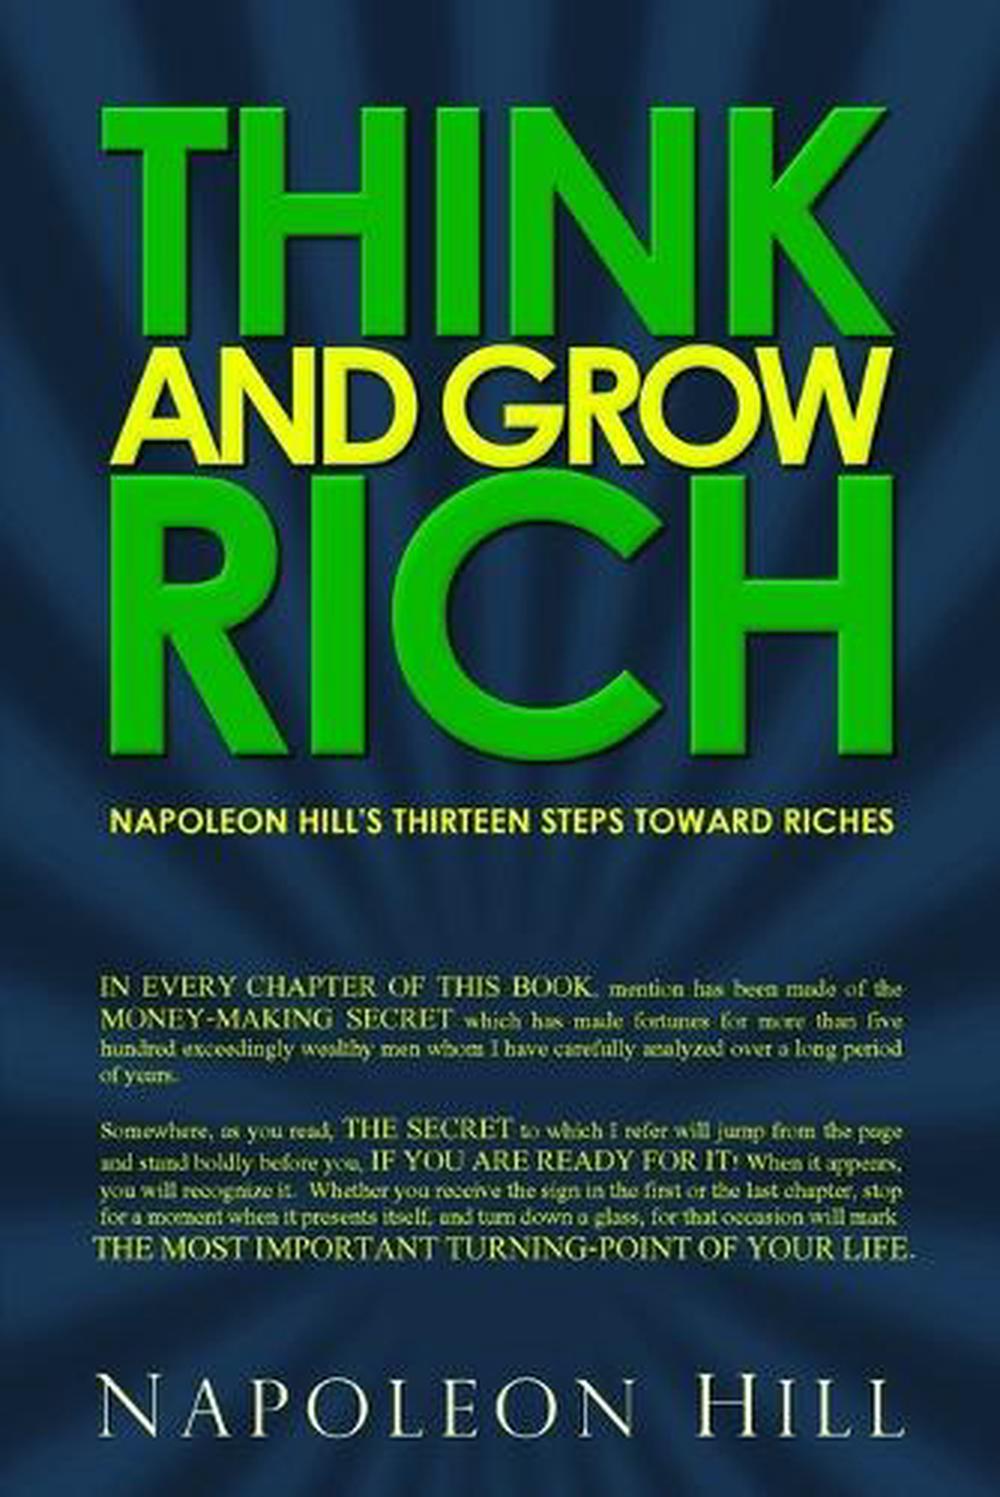 napoleon hill think and grow rich